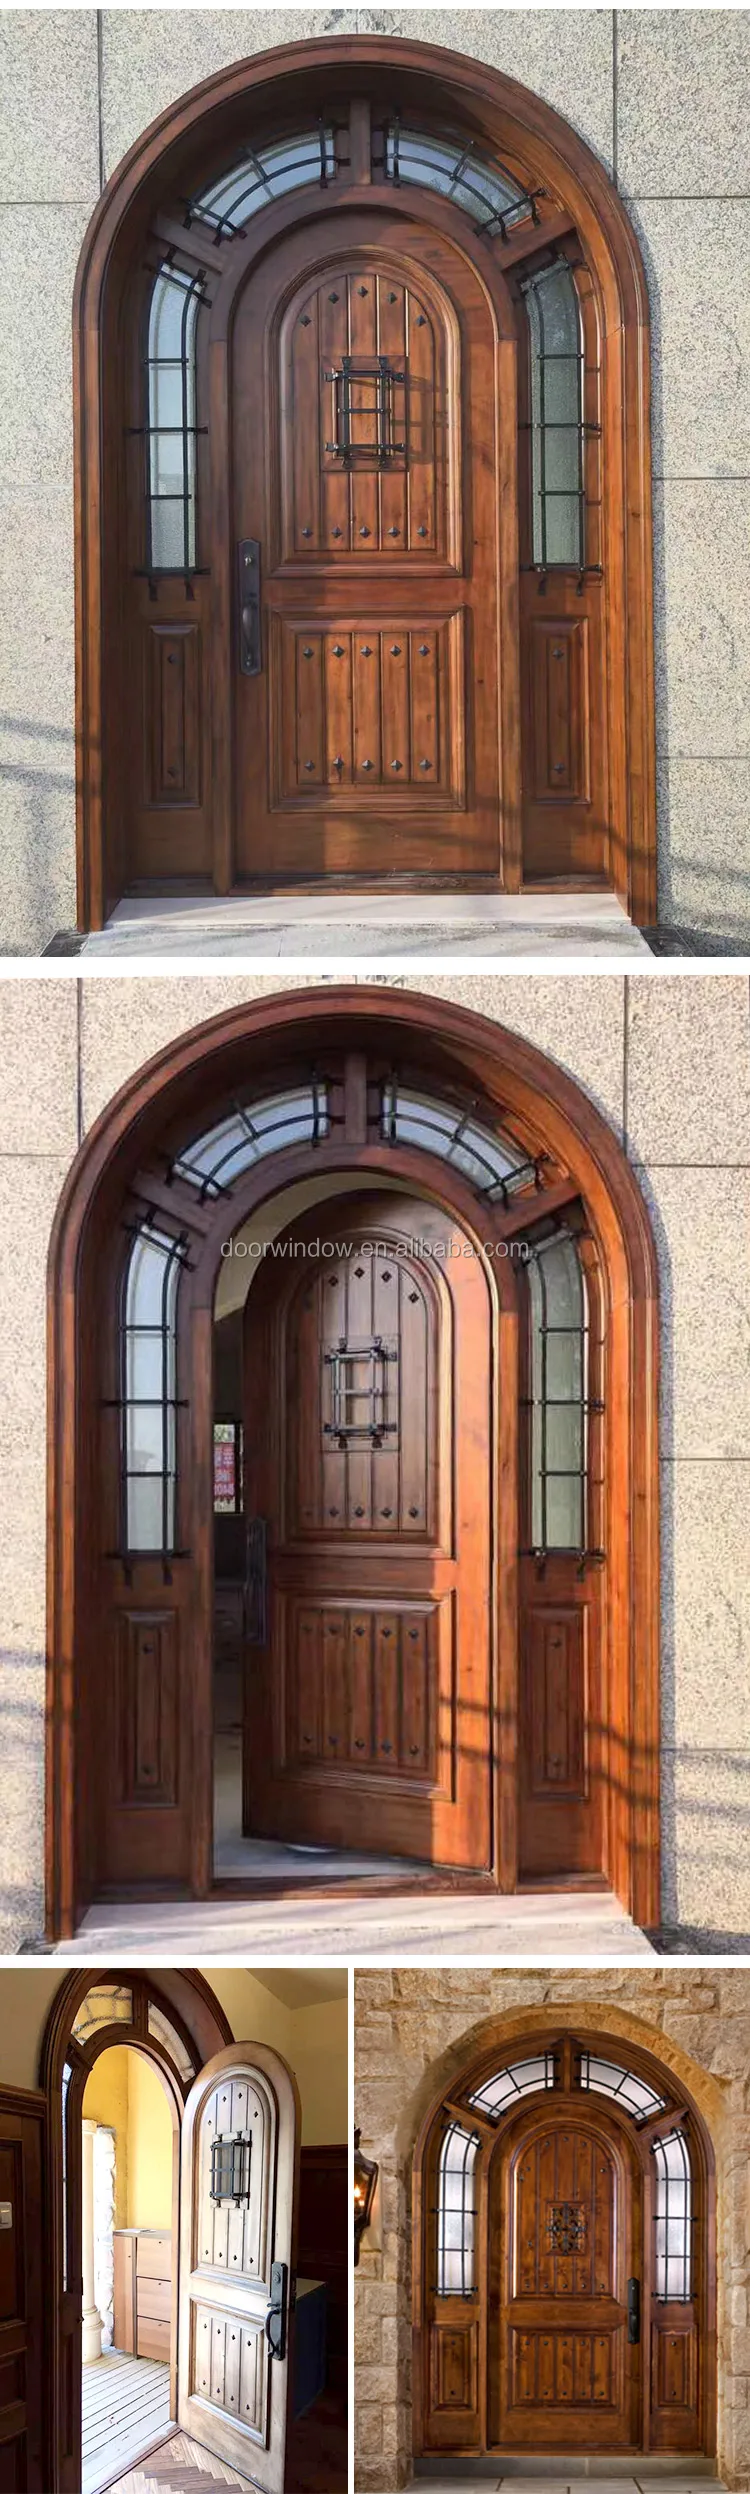 safety door design with grill Single entry wood doors arched french doors made of solid knotty alder